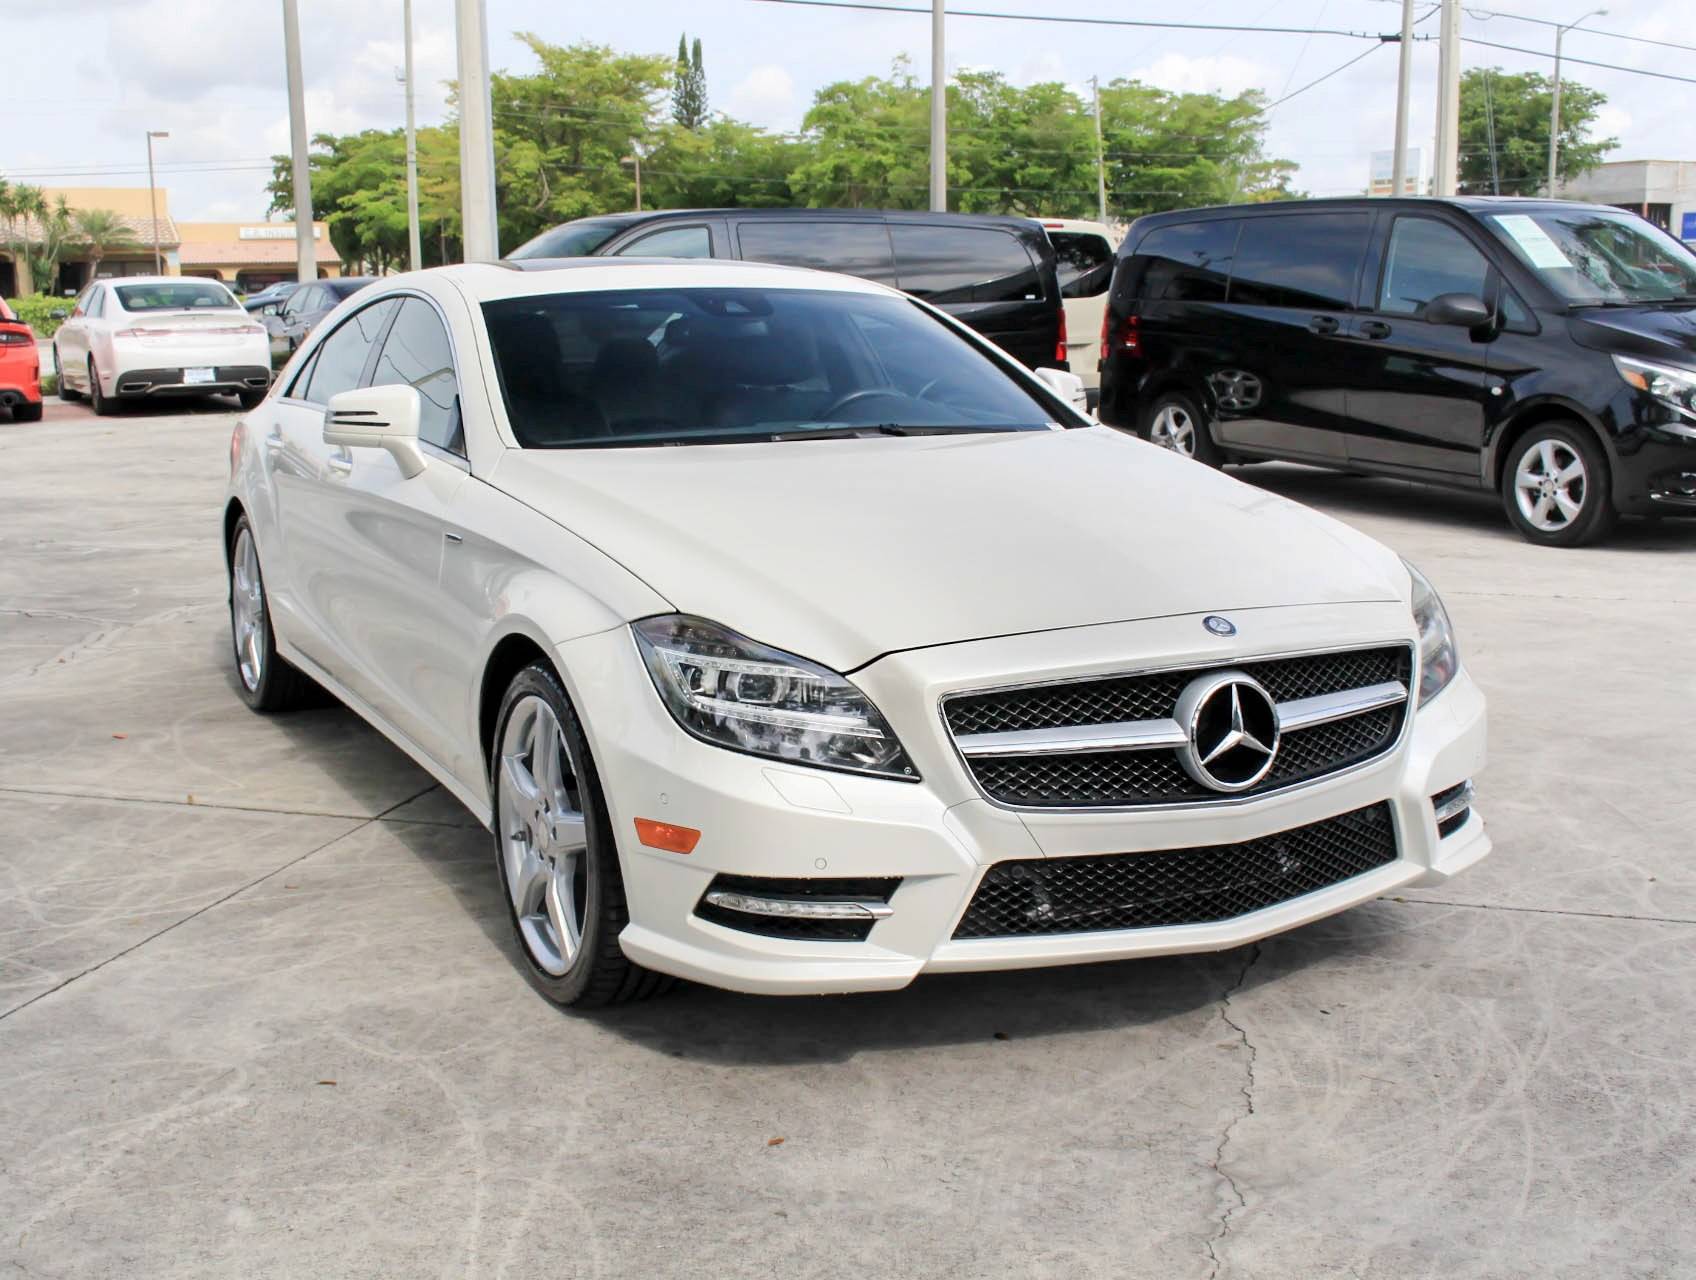 Florida Fine Cars - Used MERCEDES-BENZ CLS CLASS 2013 WEST PALM CLS550